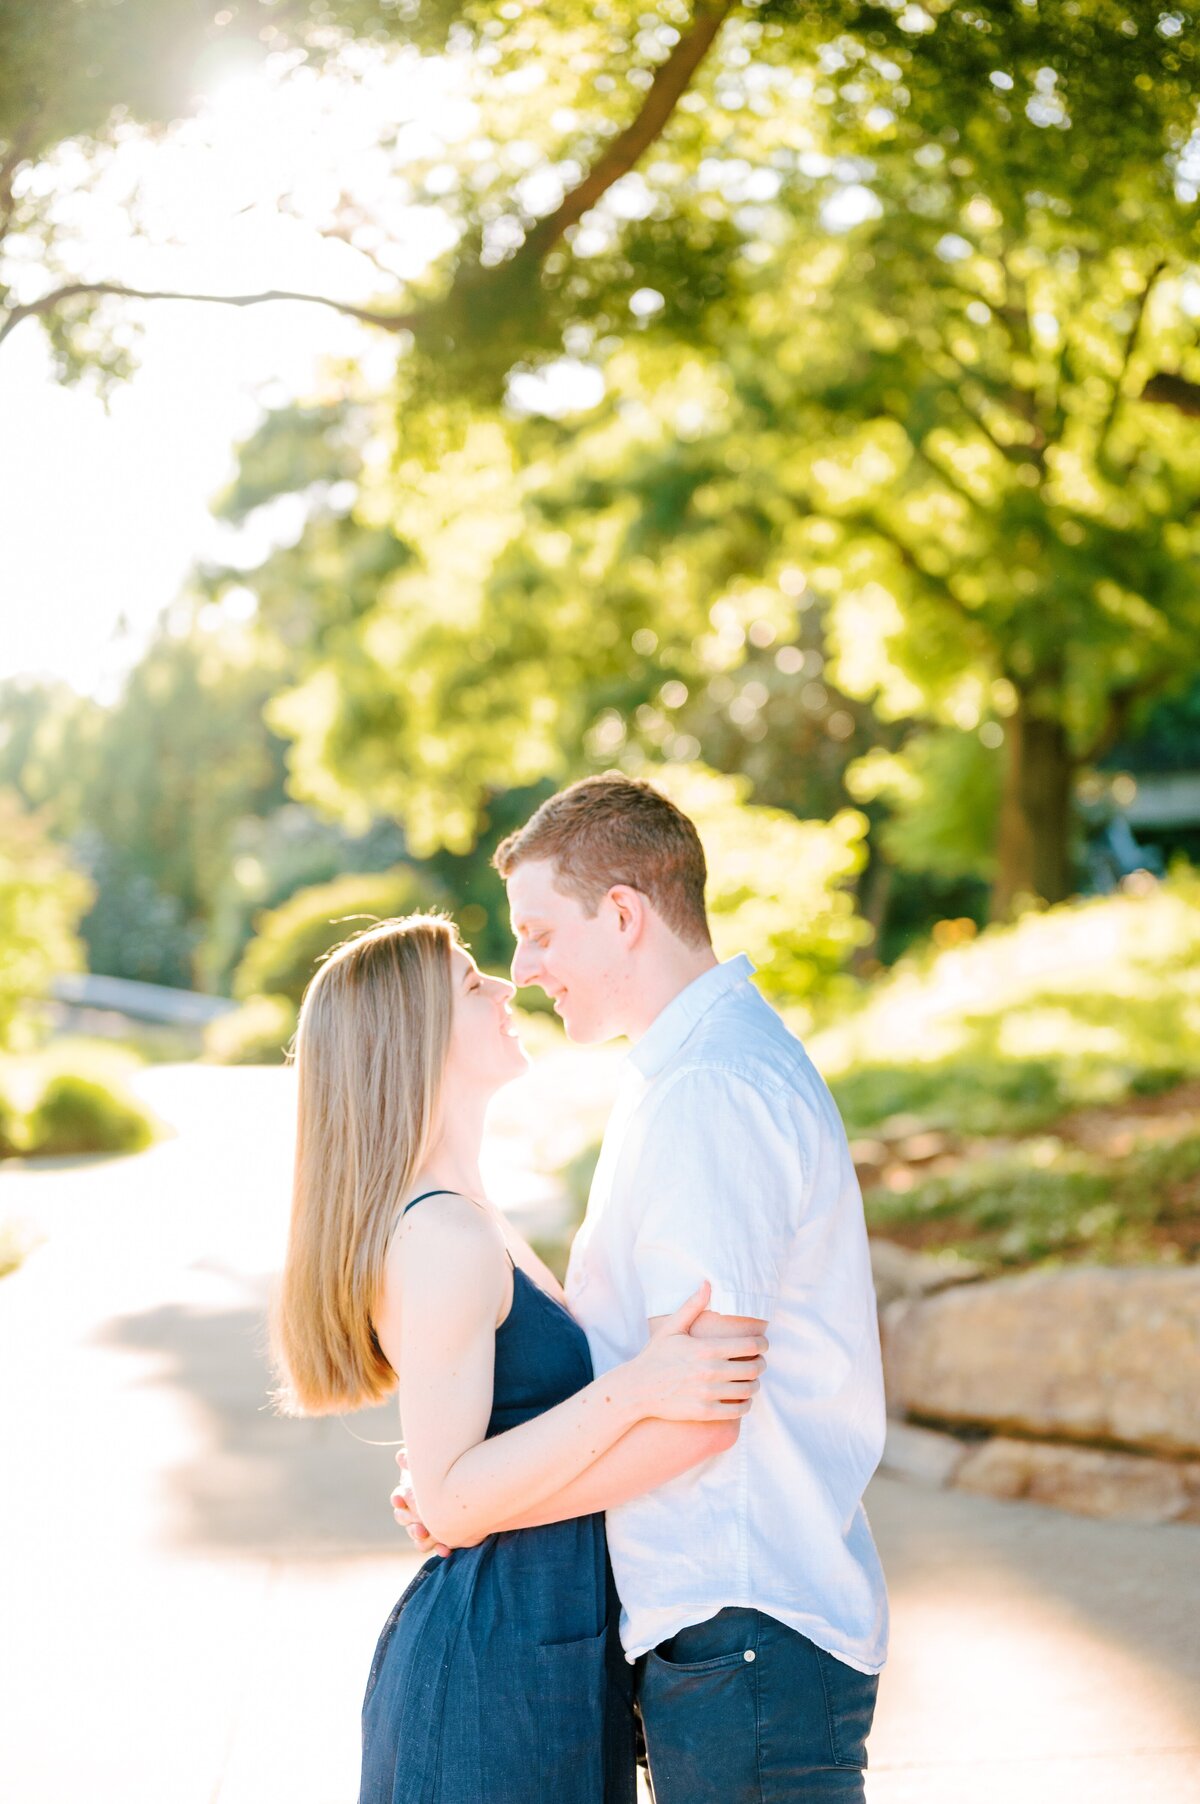 Pullen Park Engagement Session Raleigh NC_0054